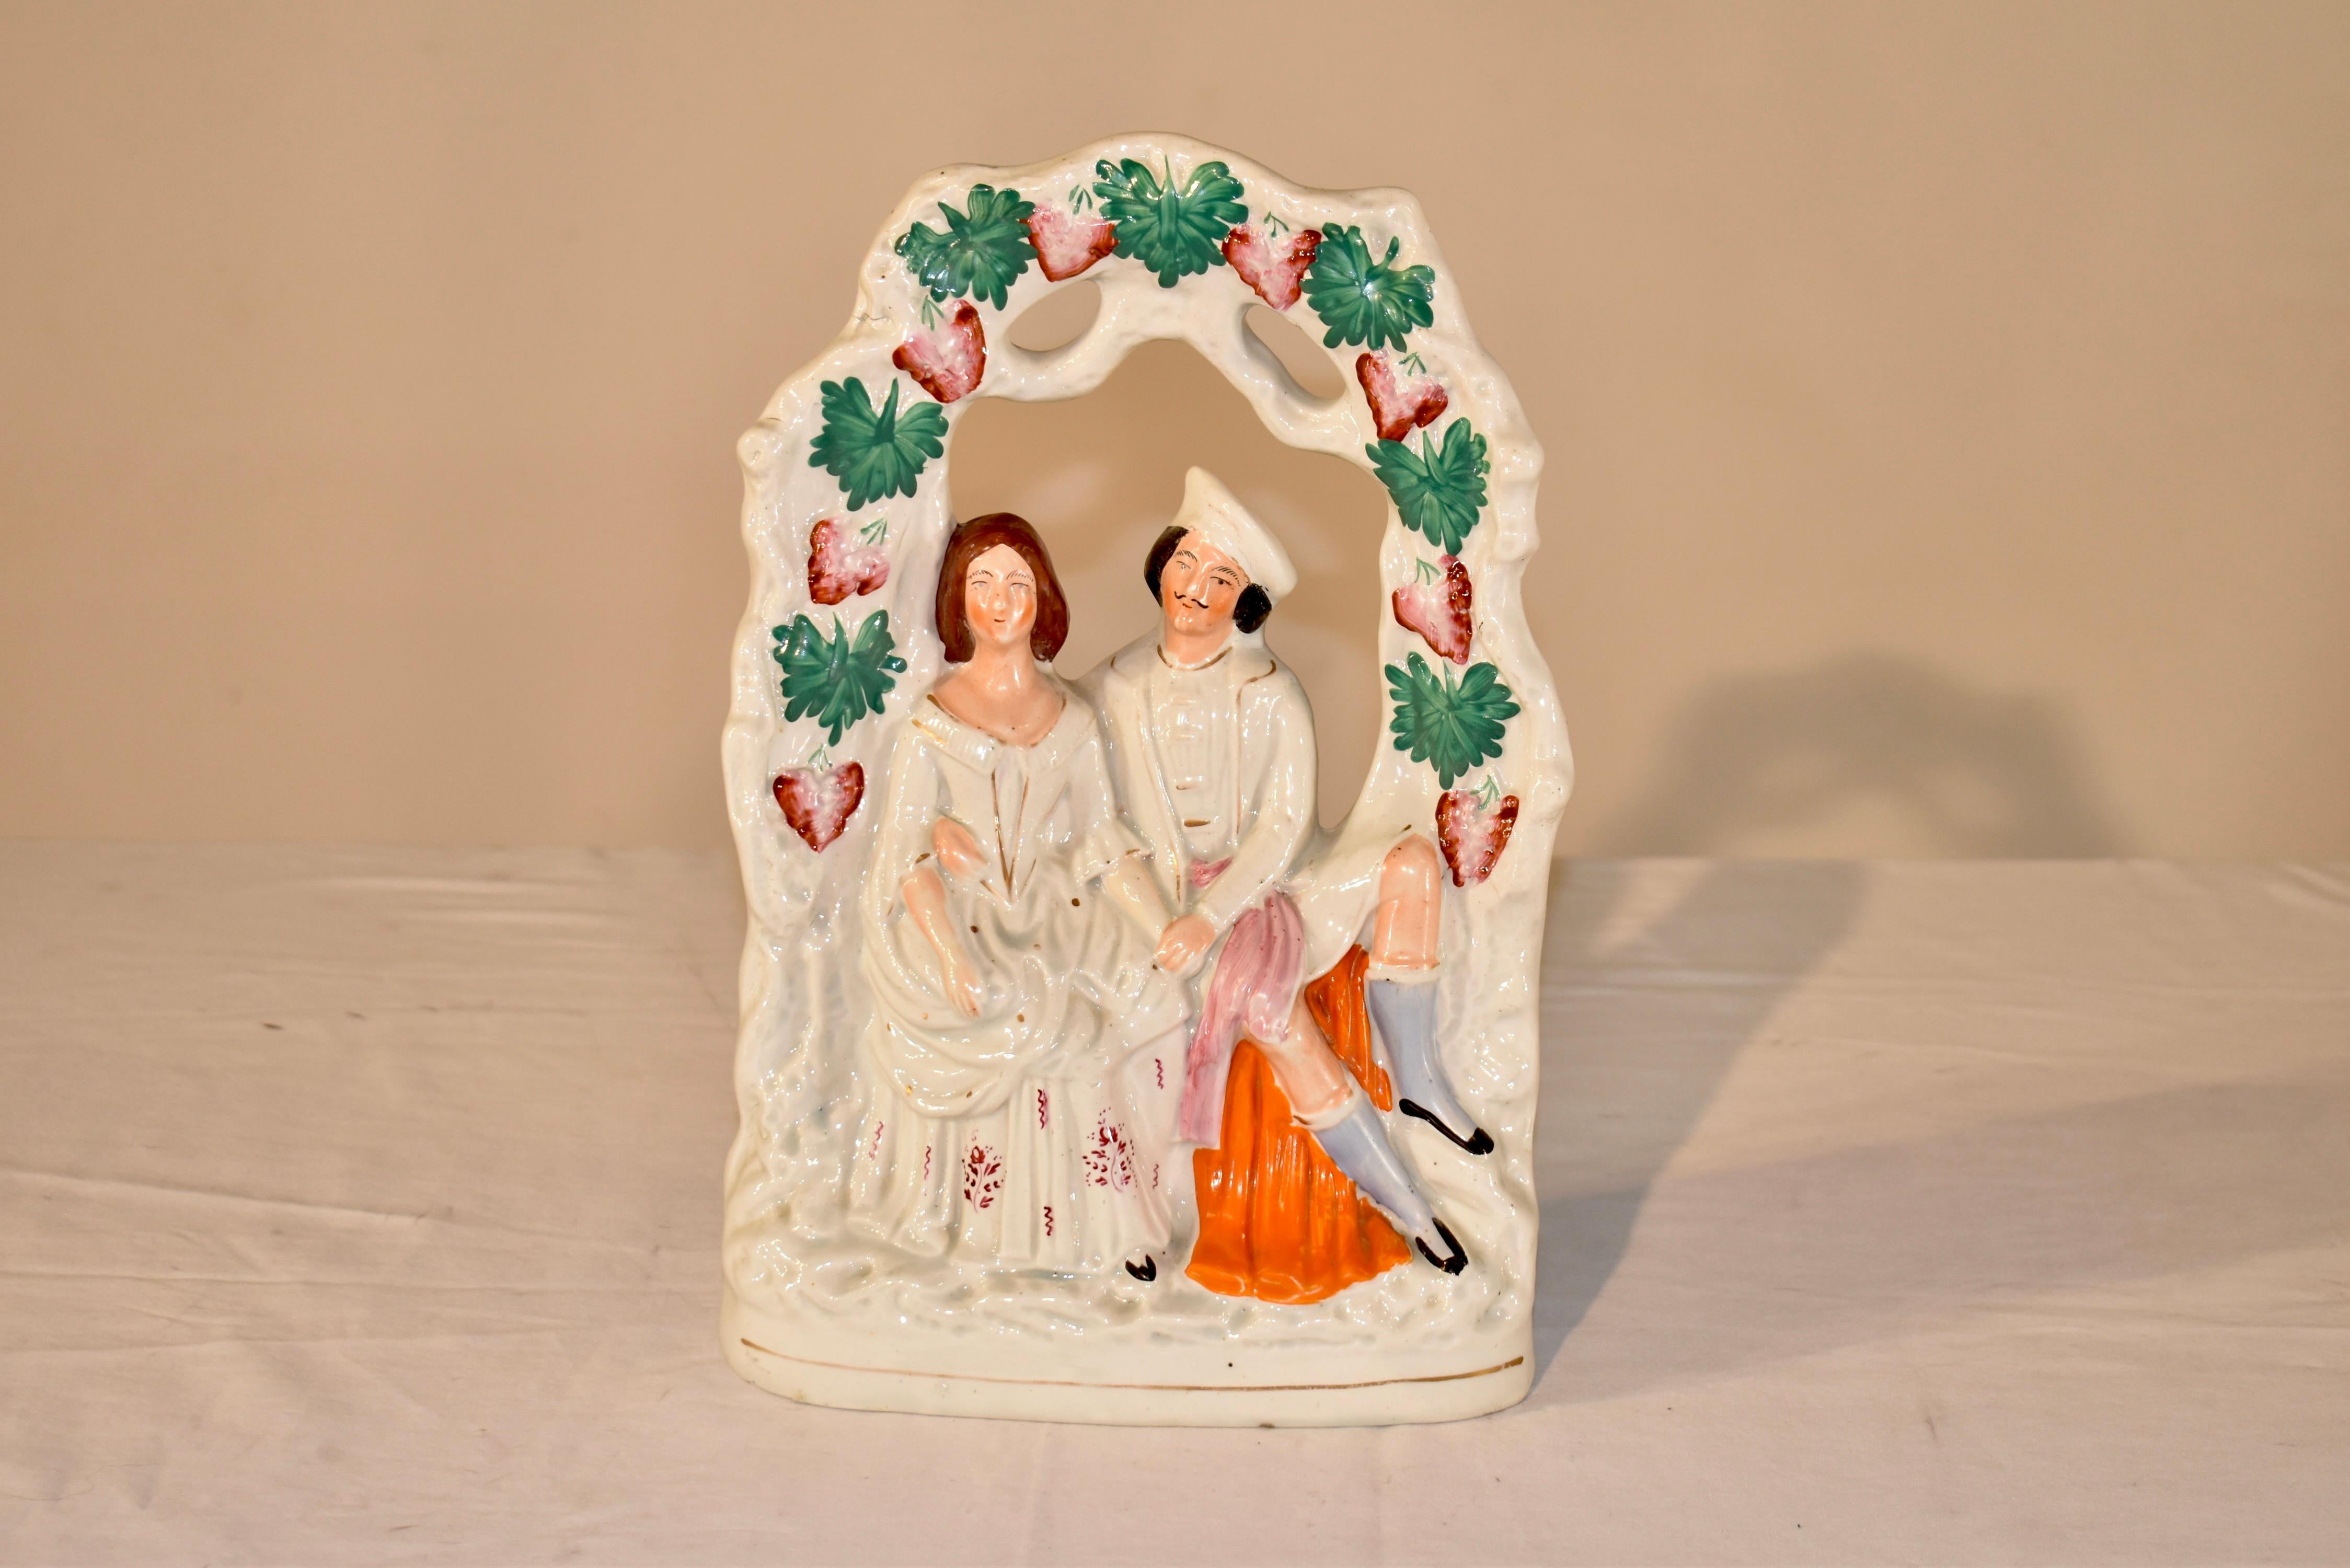 19th century Staffordshire figure group of a couple who appear to be courting sitting on a bench under an arbor with leaves and groups of flowers. The couple appears to be sitting holding hands and with his arm encircling her. They look as if they